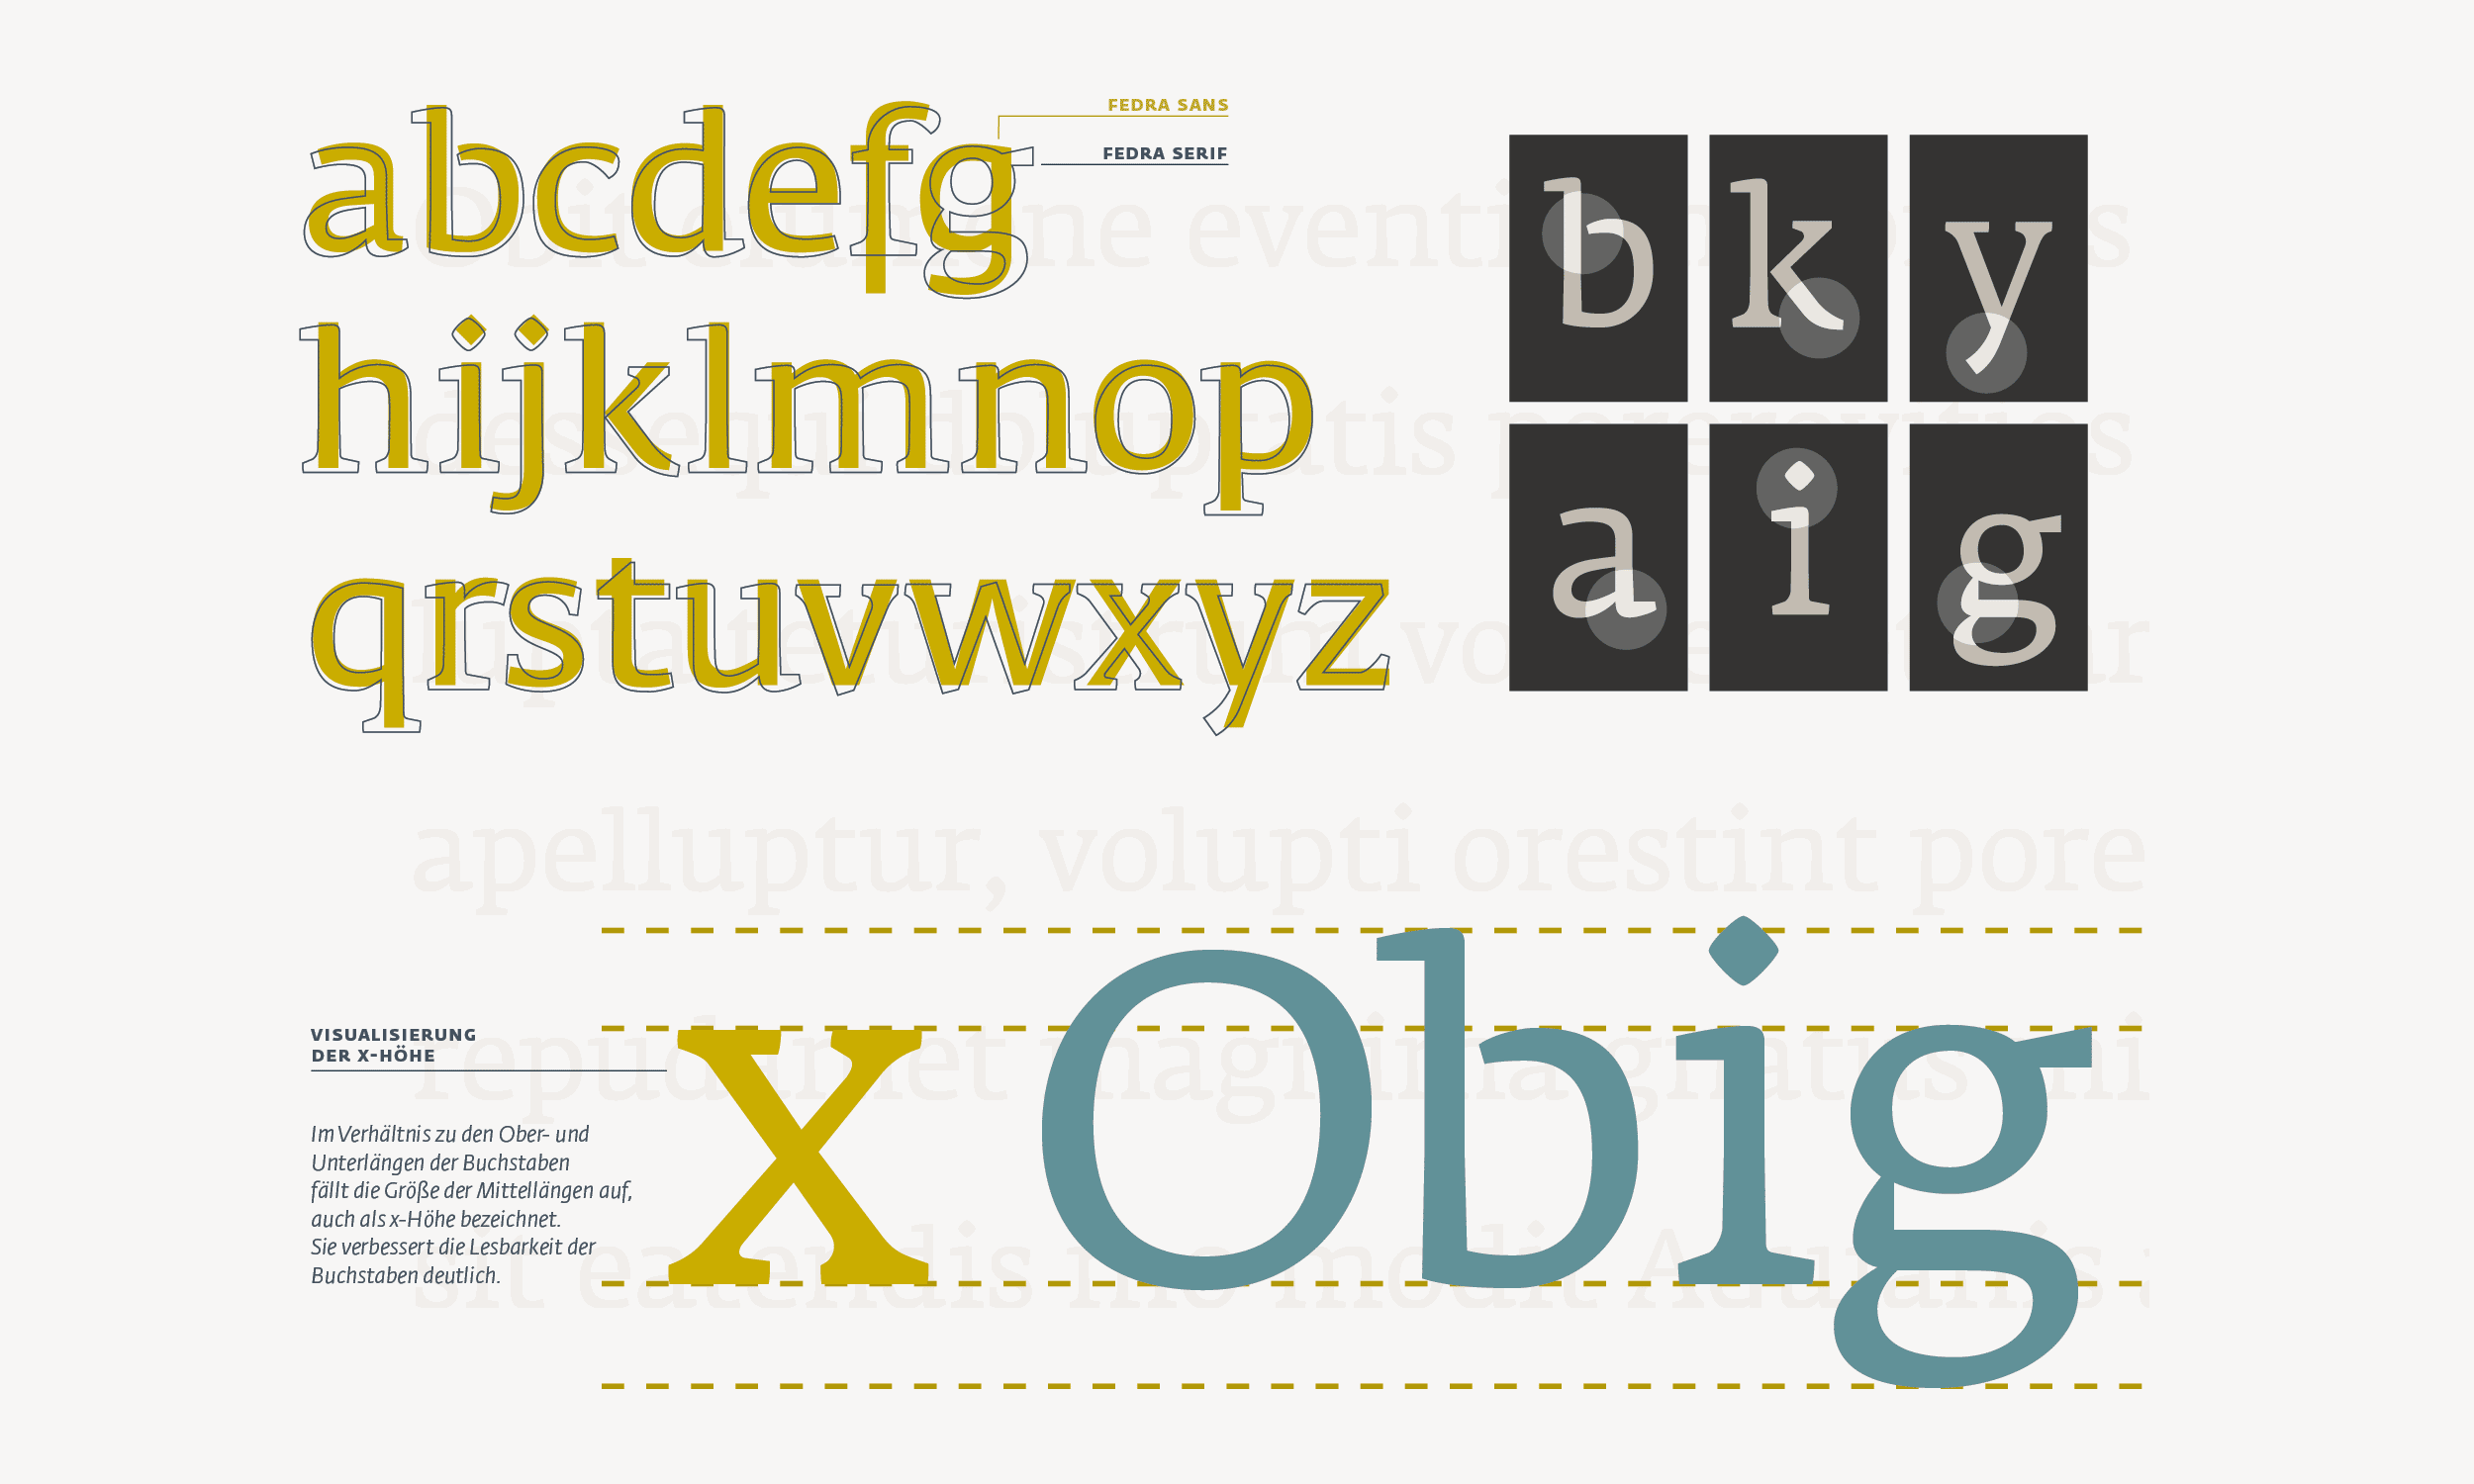 The wall design concept. A historical typeface in the colours yellow and blue is explained in detail.